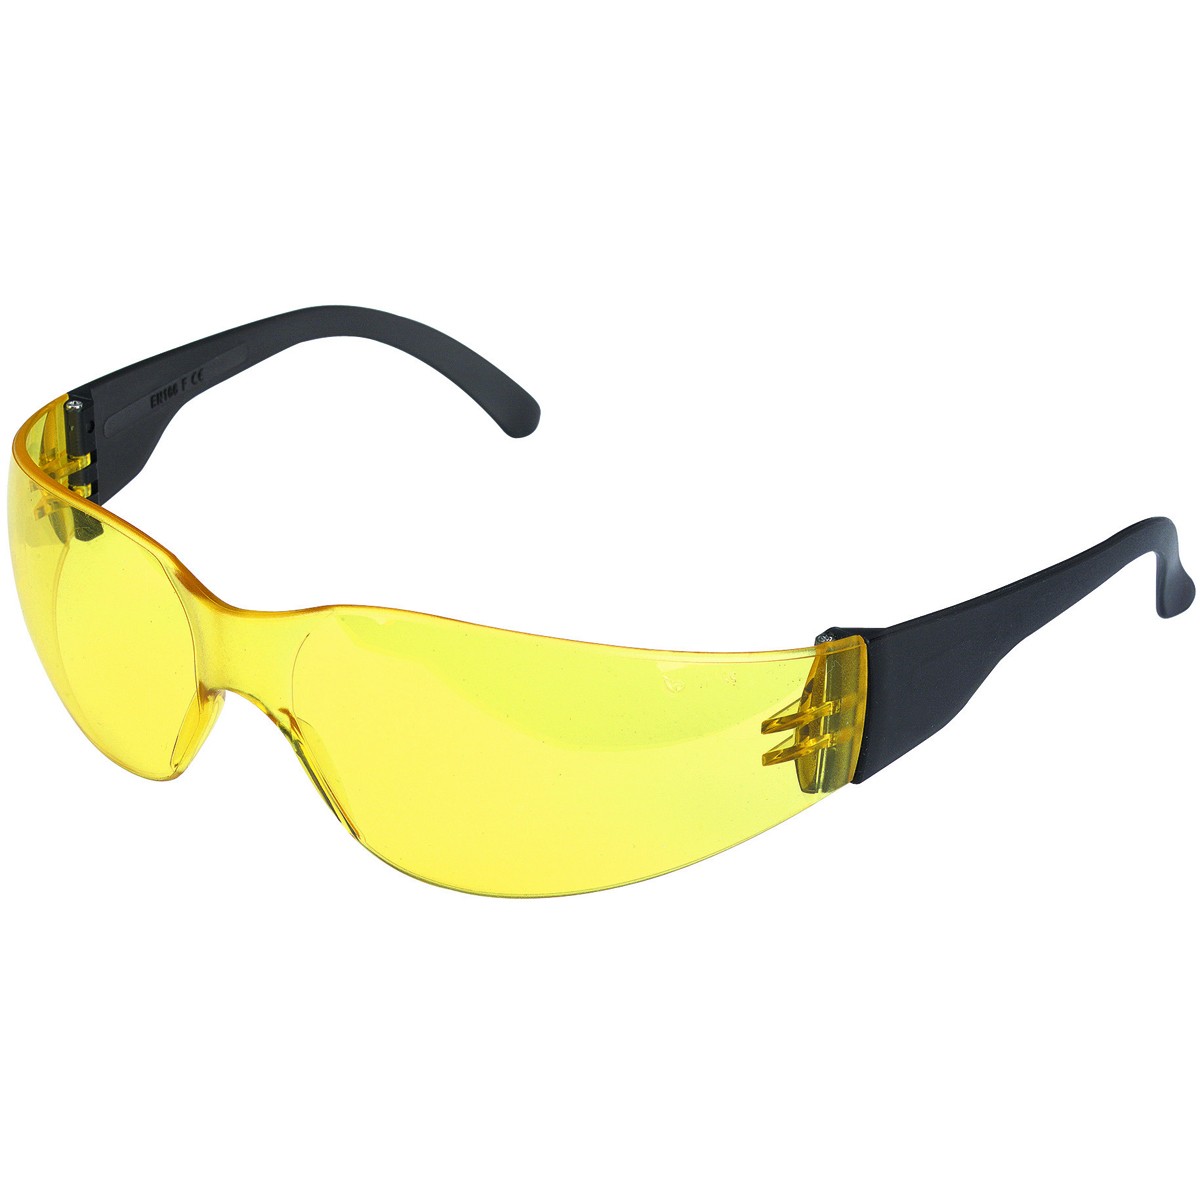 UV Safety Glasses with Yellow Lenses